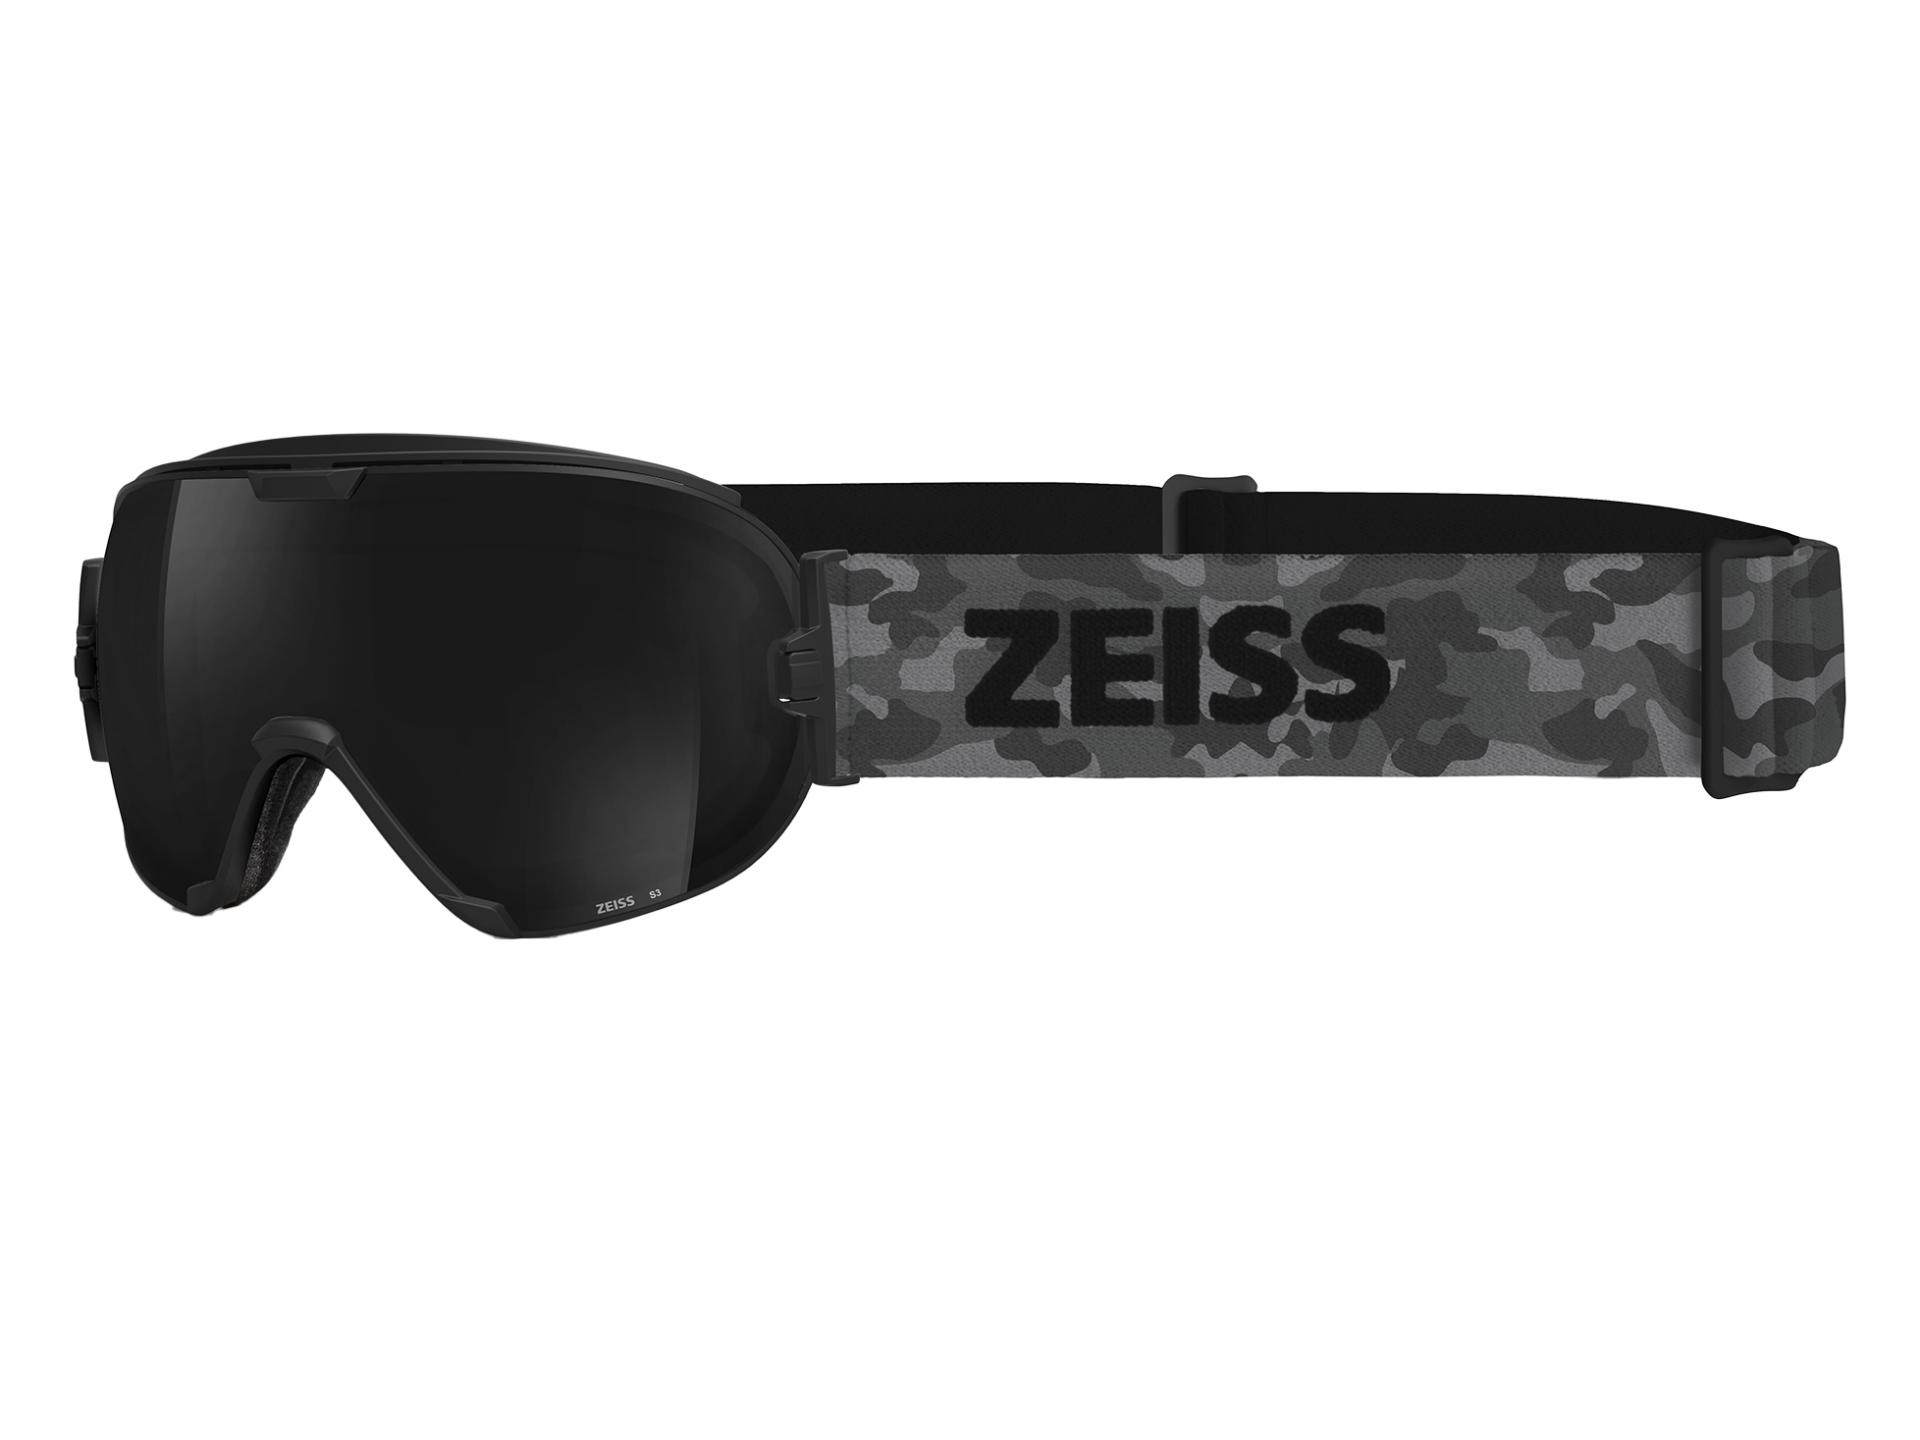 ZEISS snow goggle: Interchangeable Total Black